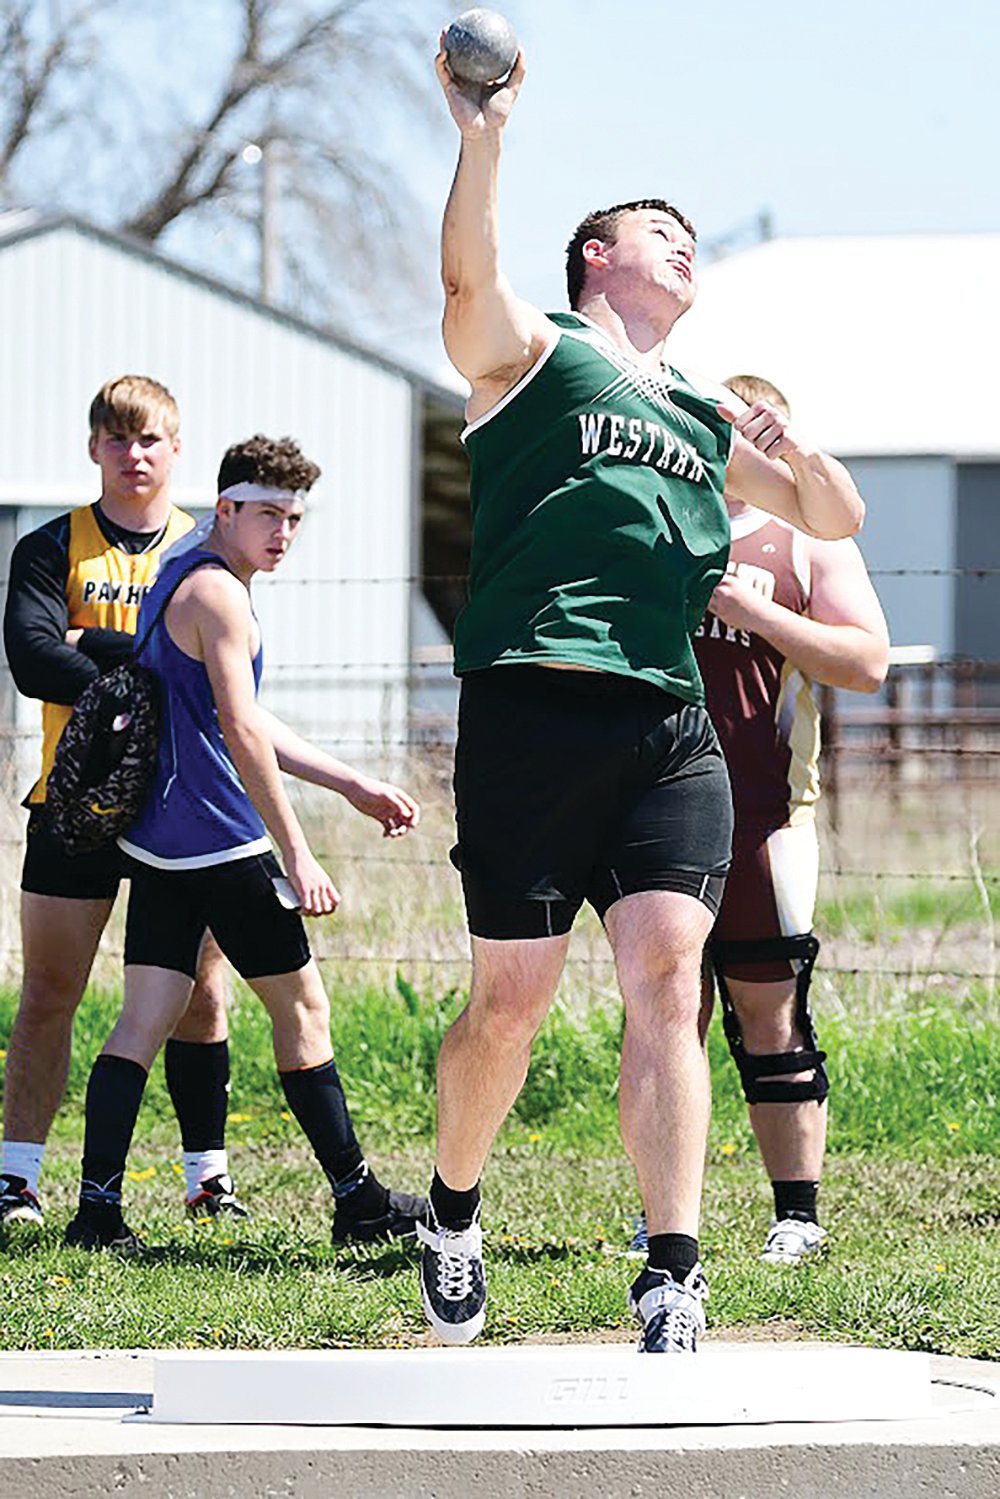 Westran’s Brenin Howell heaves the shot put during Saturday’s Class 2 District 3 meet at Putnam County High School in Unionville. Howell qualified for this week’s sectional meet with a mark of 15.4 meters.